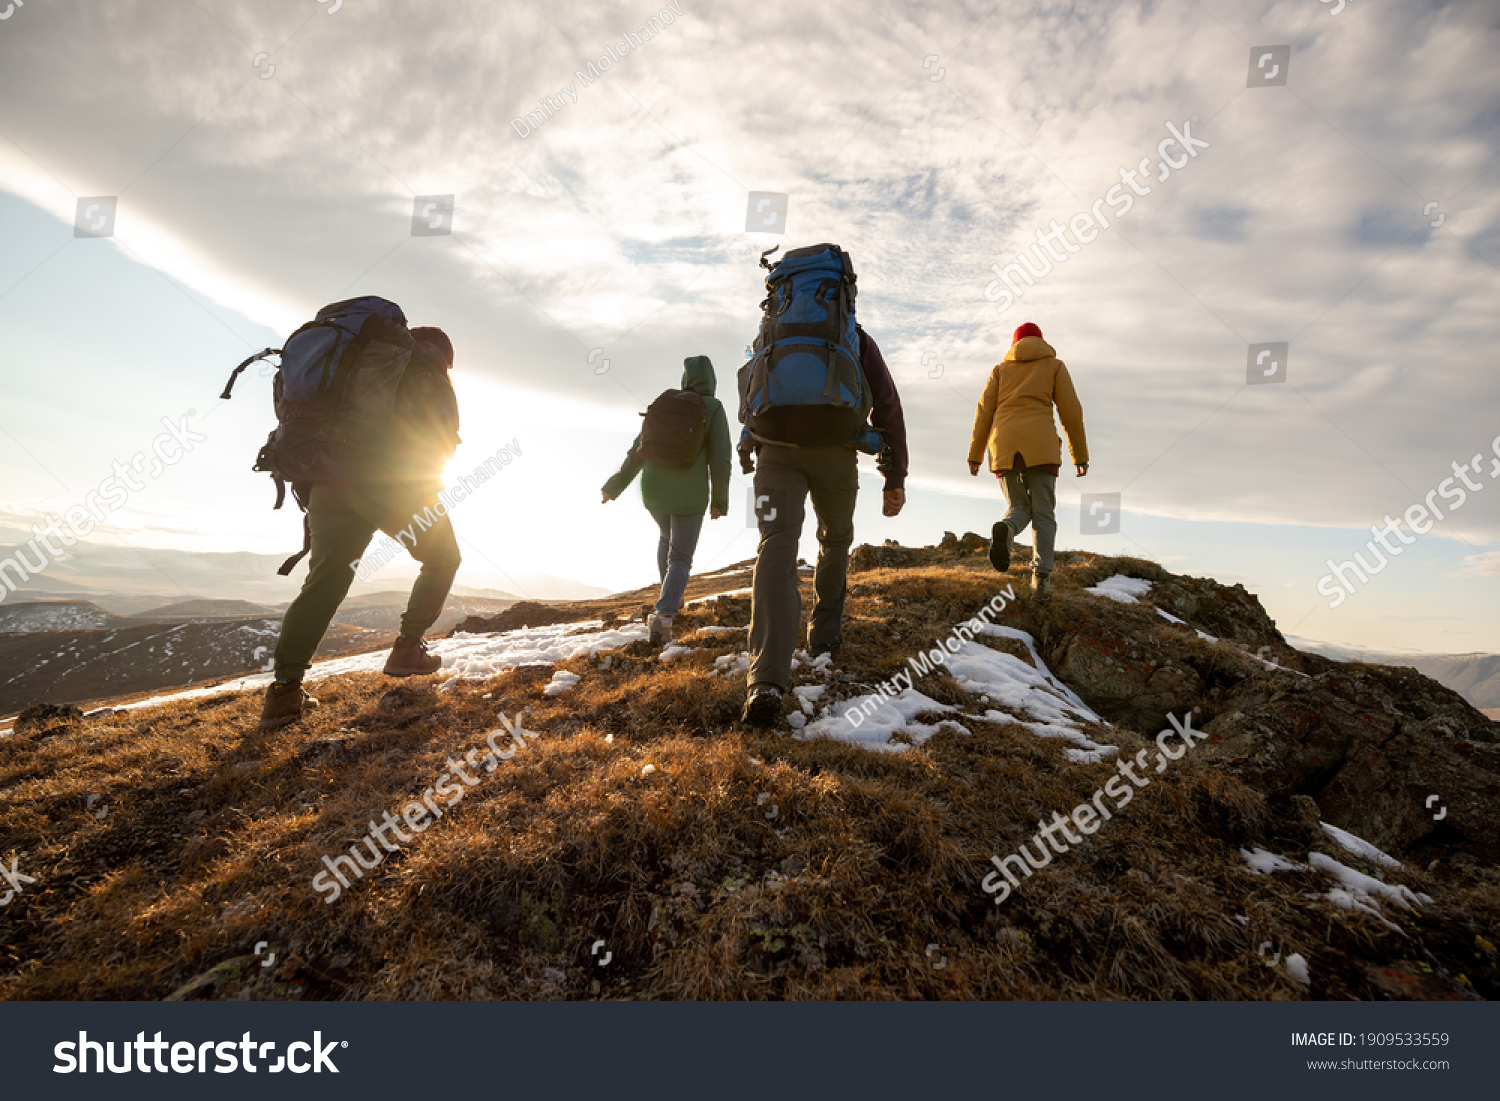 Group of four hikers with backpacks walks in mountains at sunset #1909533559